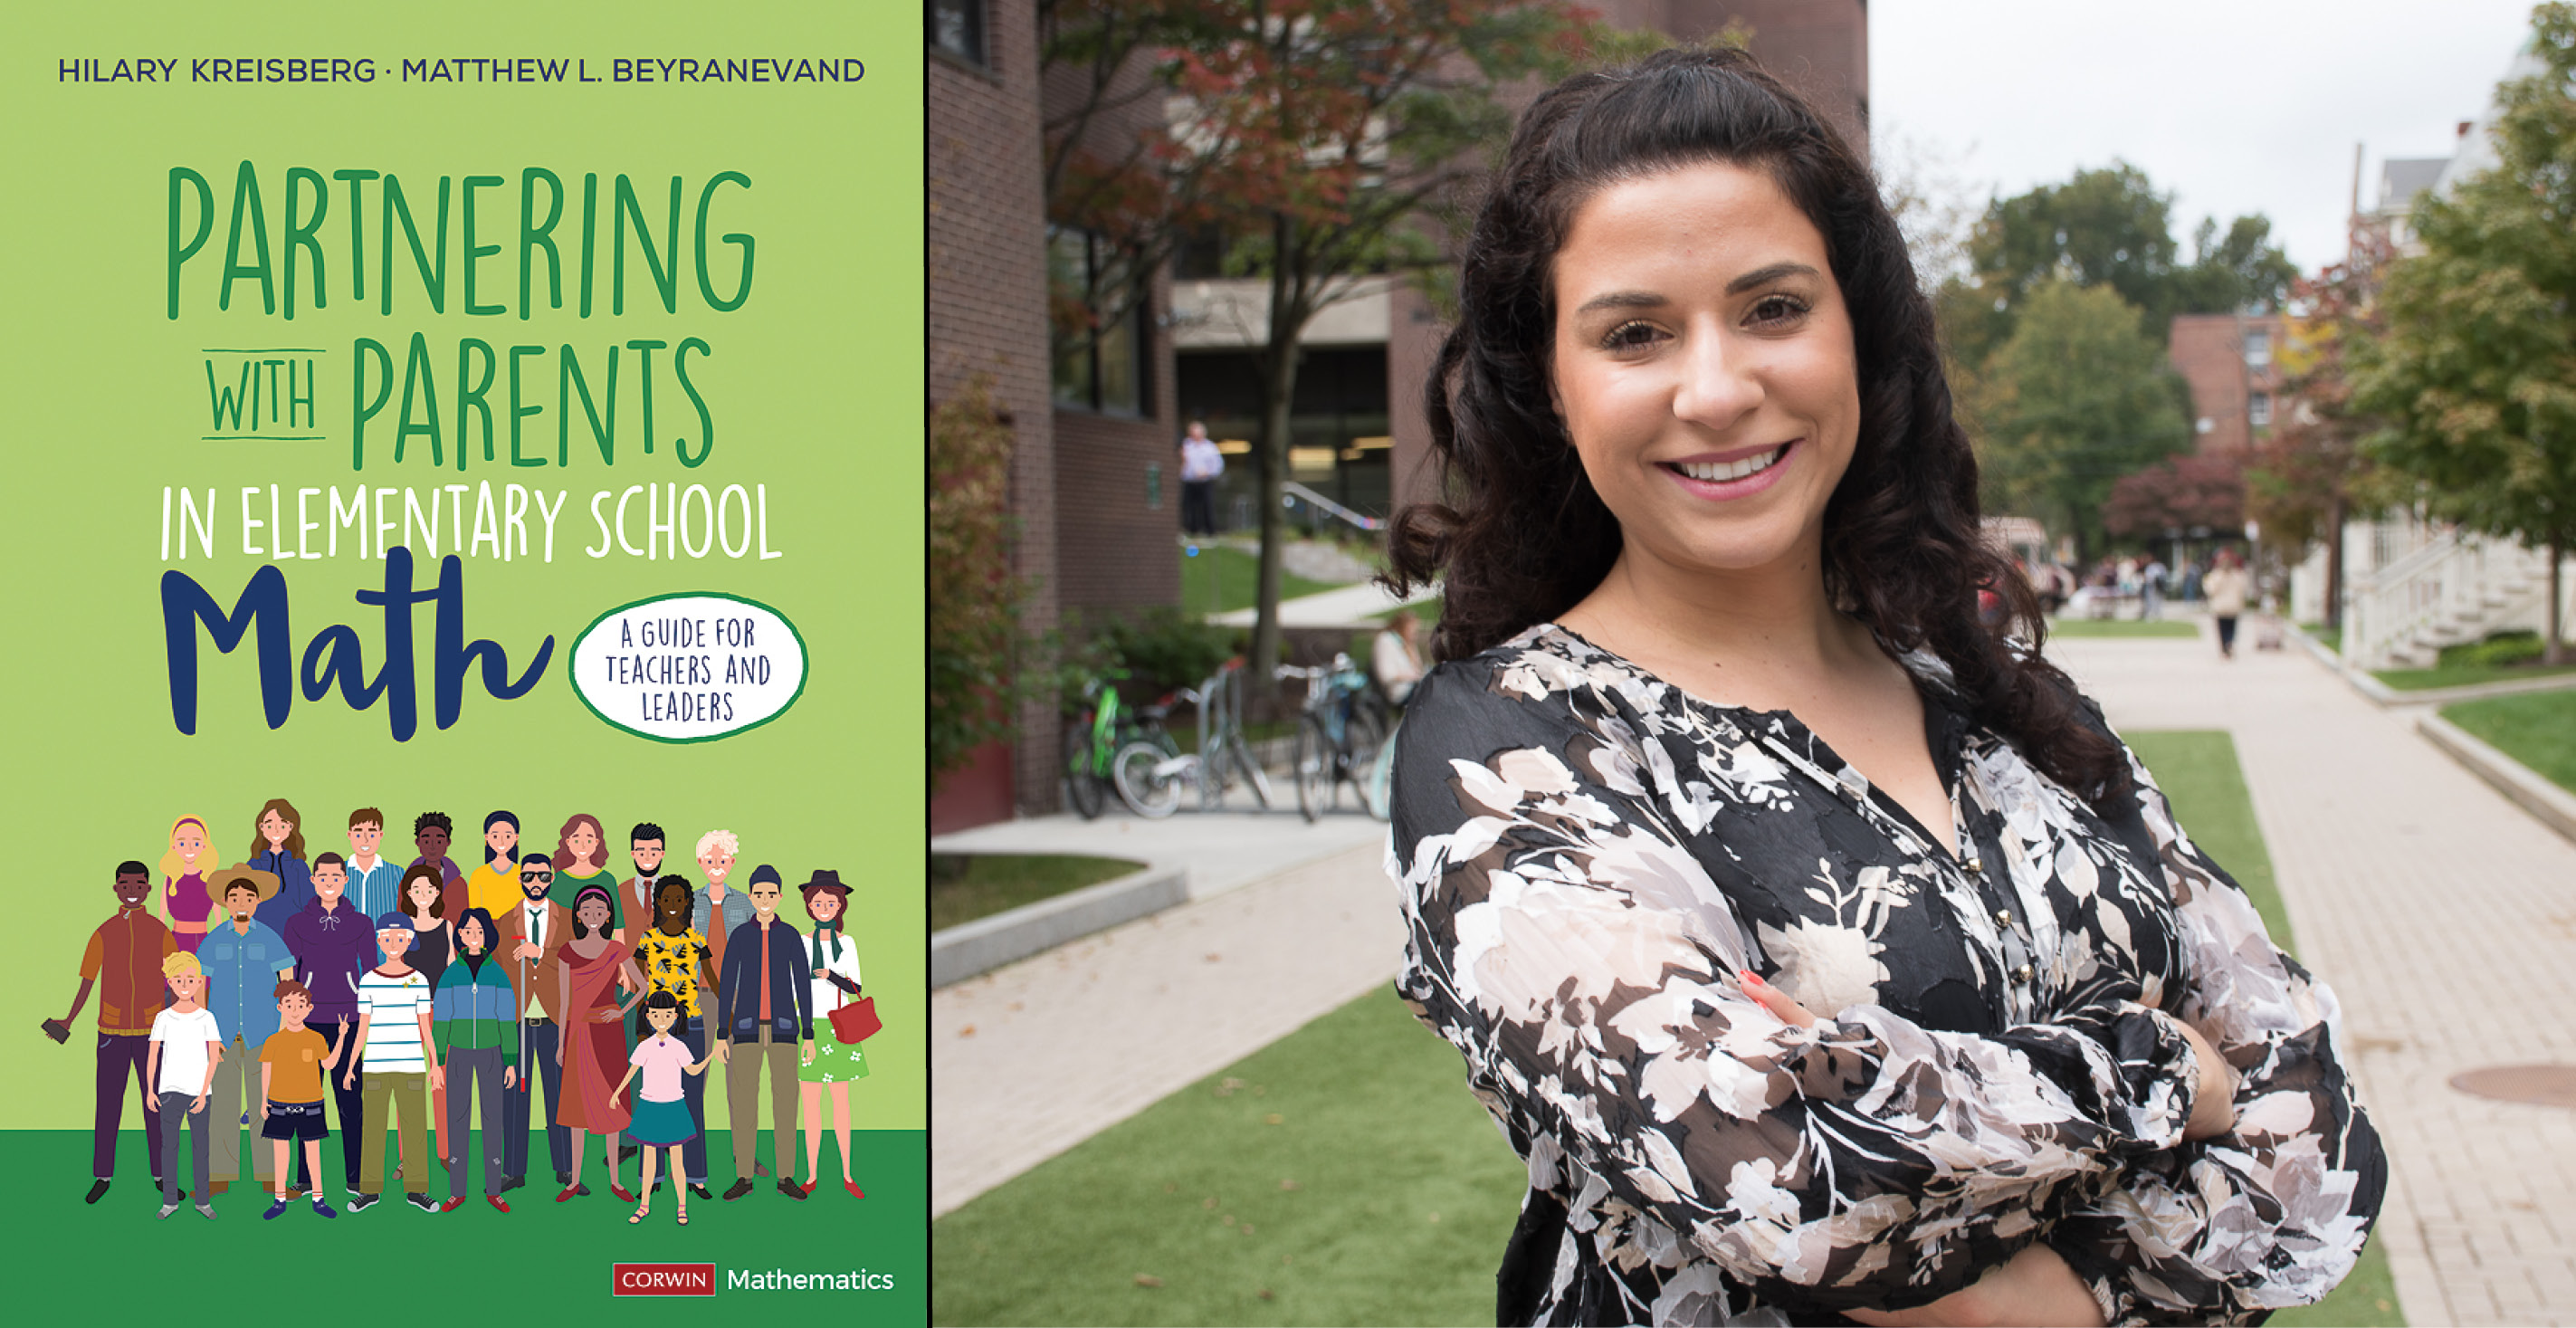 Photo of hilary kreisberg and her new book: "Partnering with Parents in Elementary School Math,” which has an illustrated cover